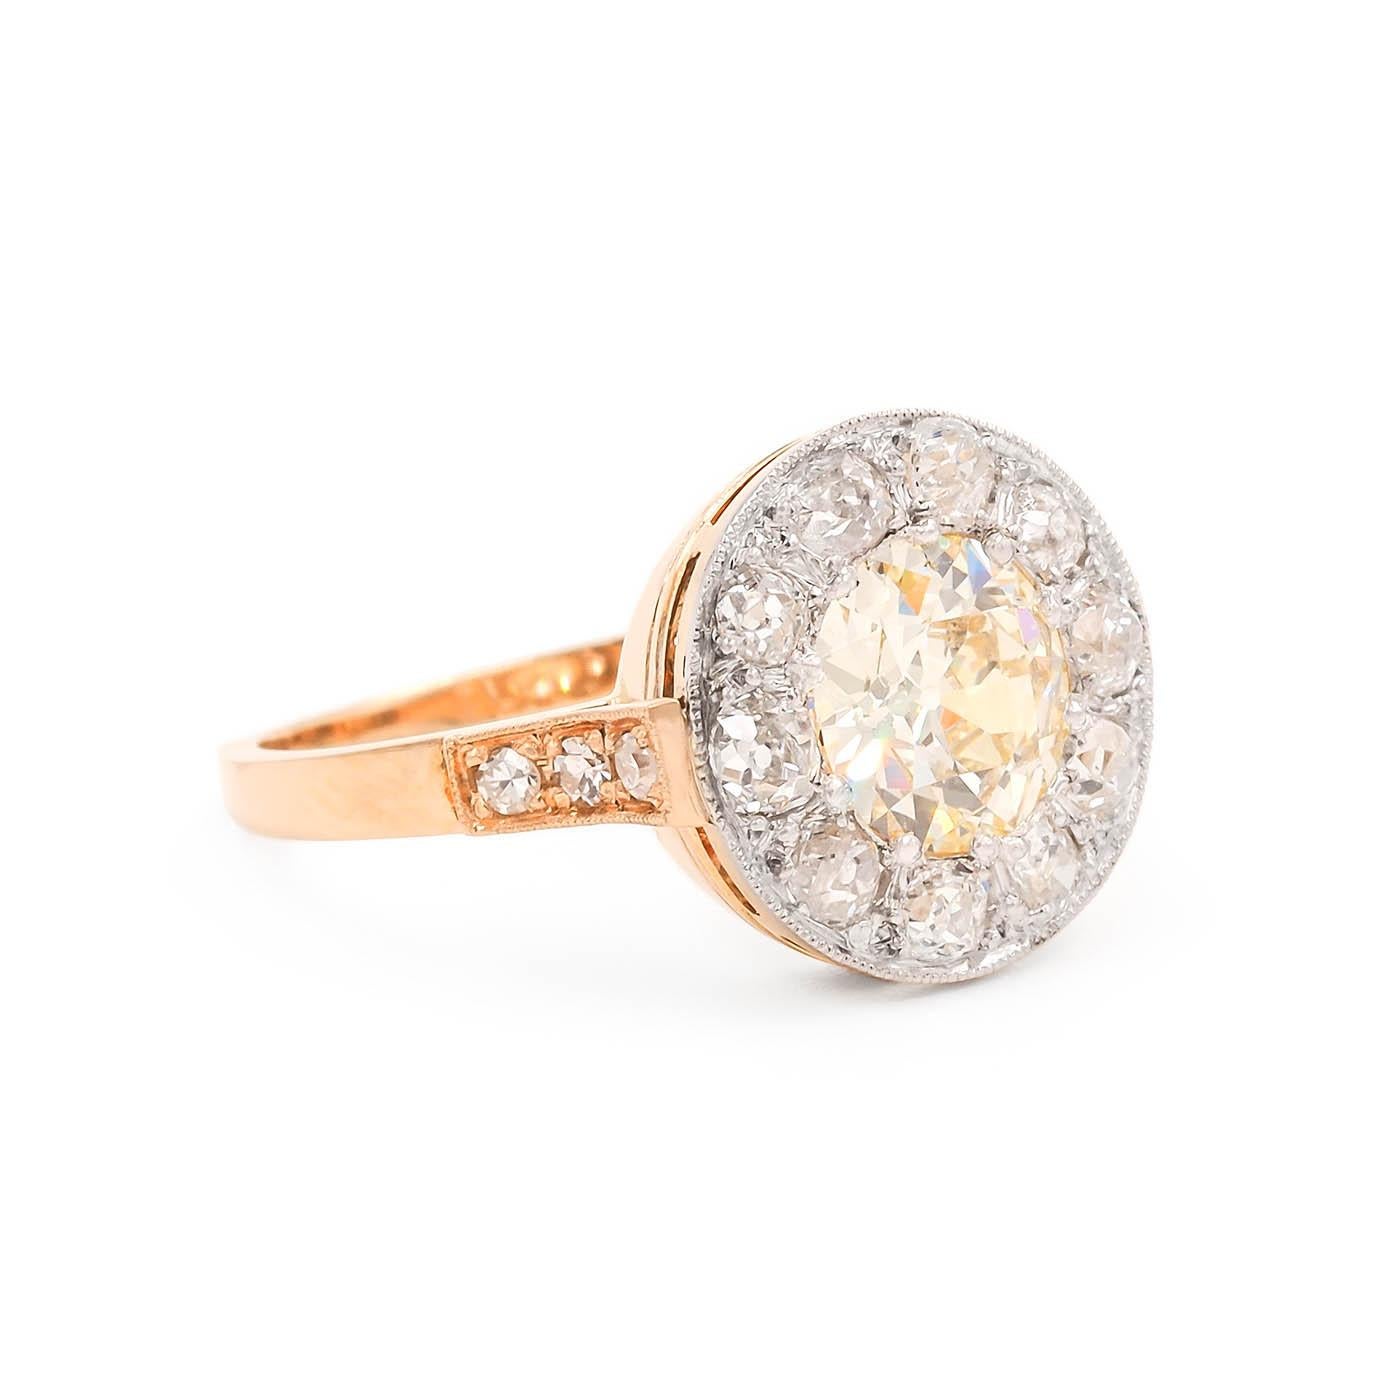 French Edwardian era 1.83 Carat Old European Cut Diamond Cluster Engagement Ring composed of 18k yellow gold and platinum. With a 1.83 carat Old European Cut diamond, GIA certified S-T color & VS2 clarity. The center diamond is surrounded by 10 Old